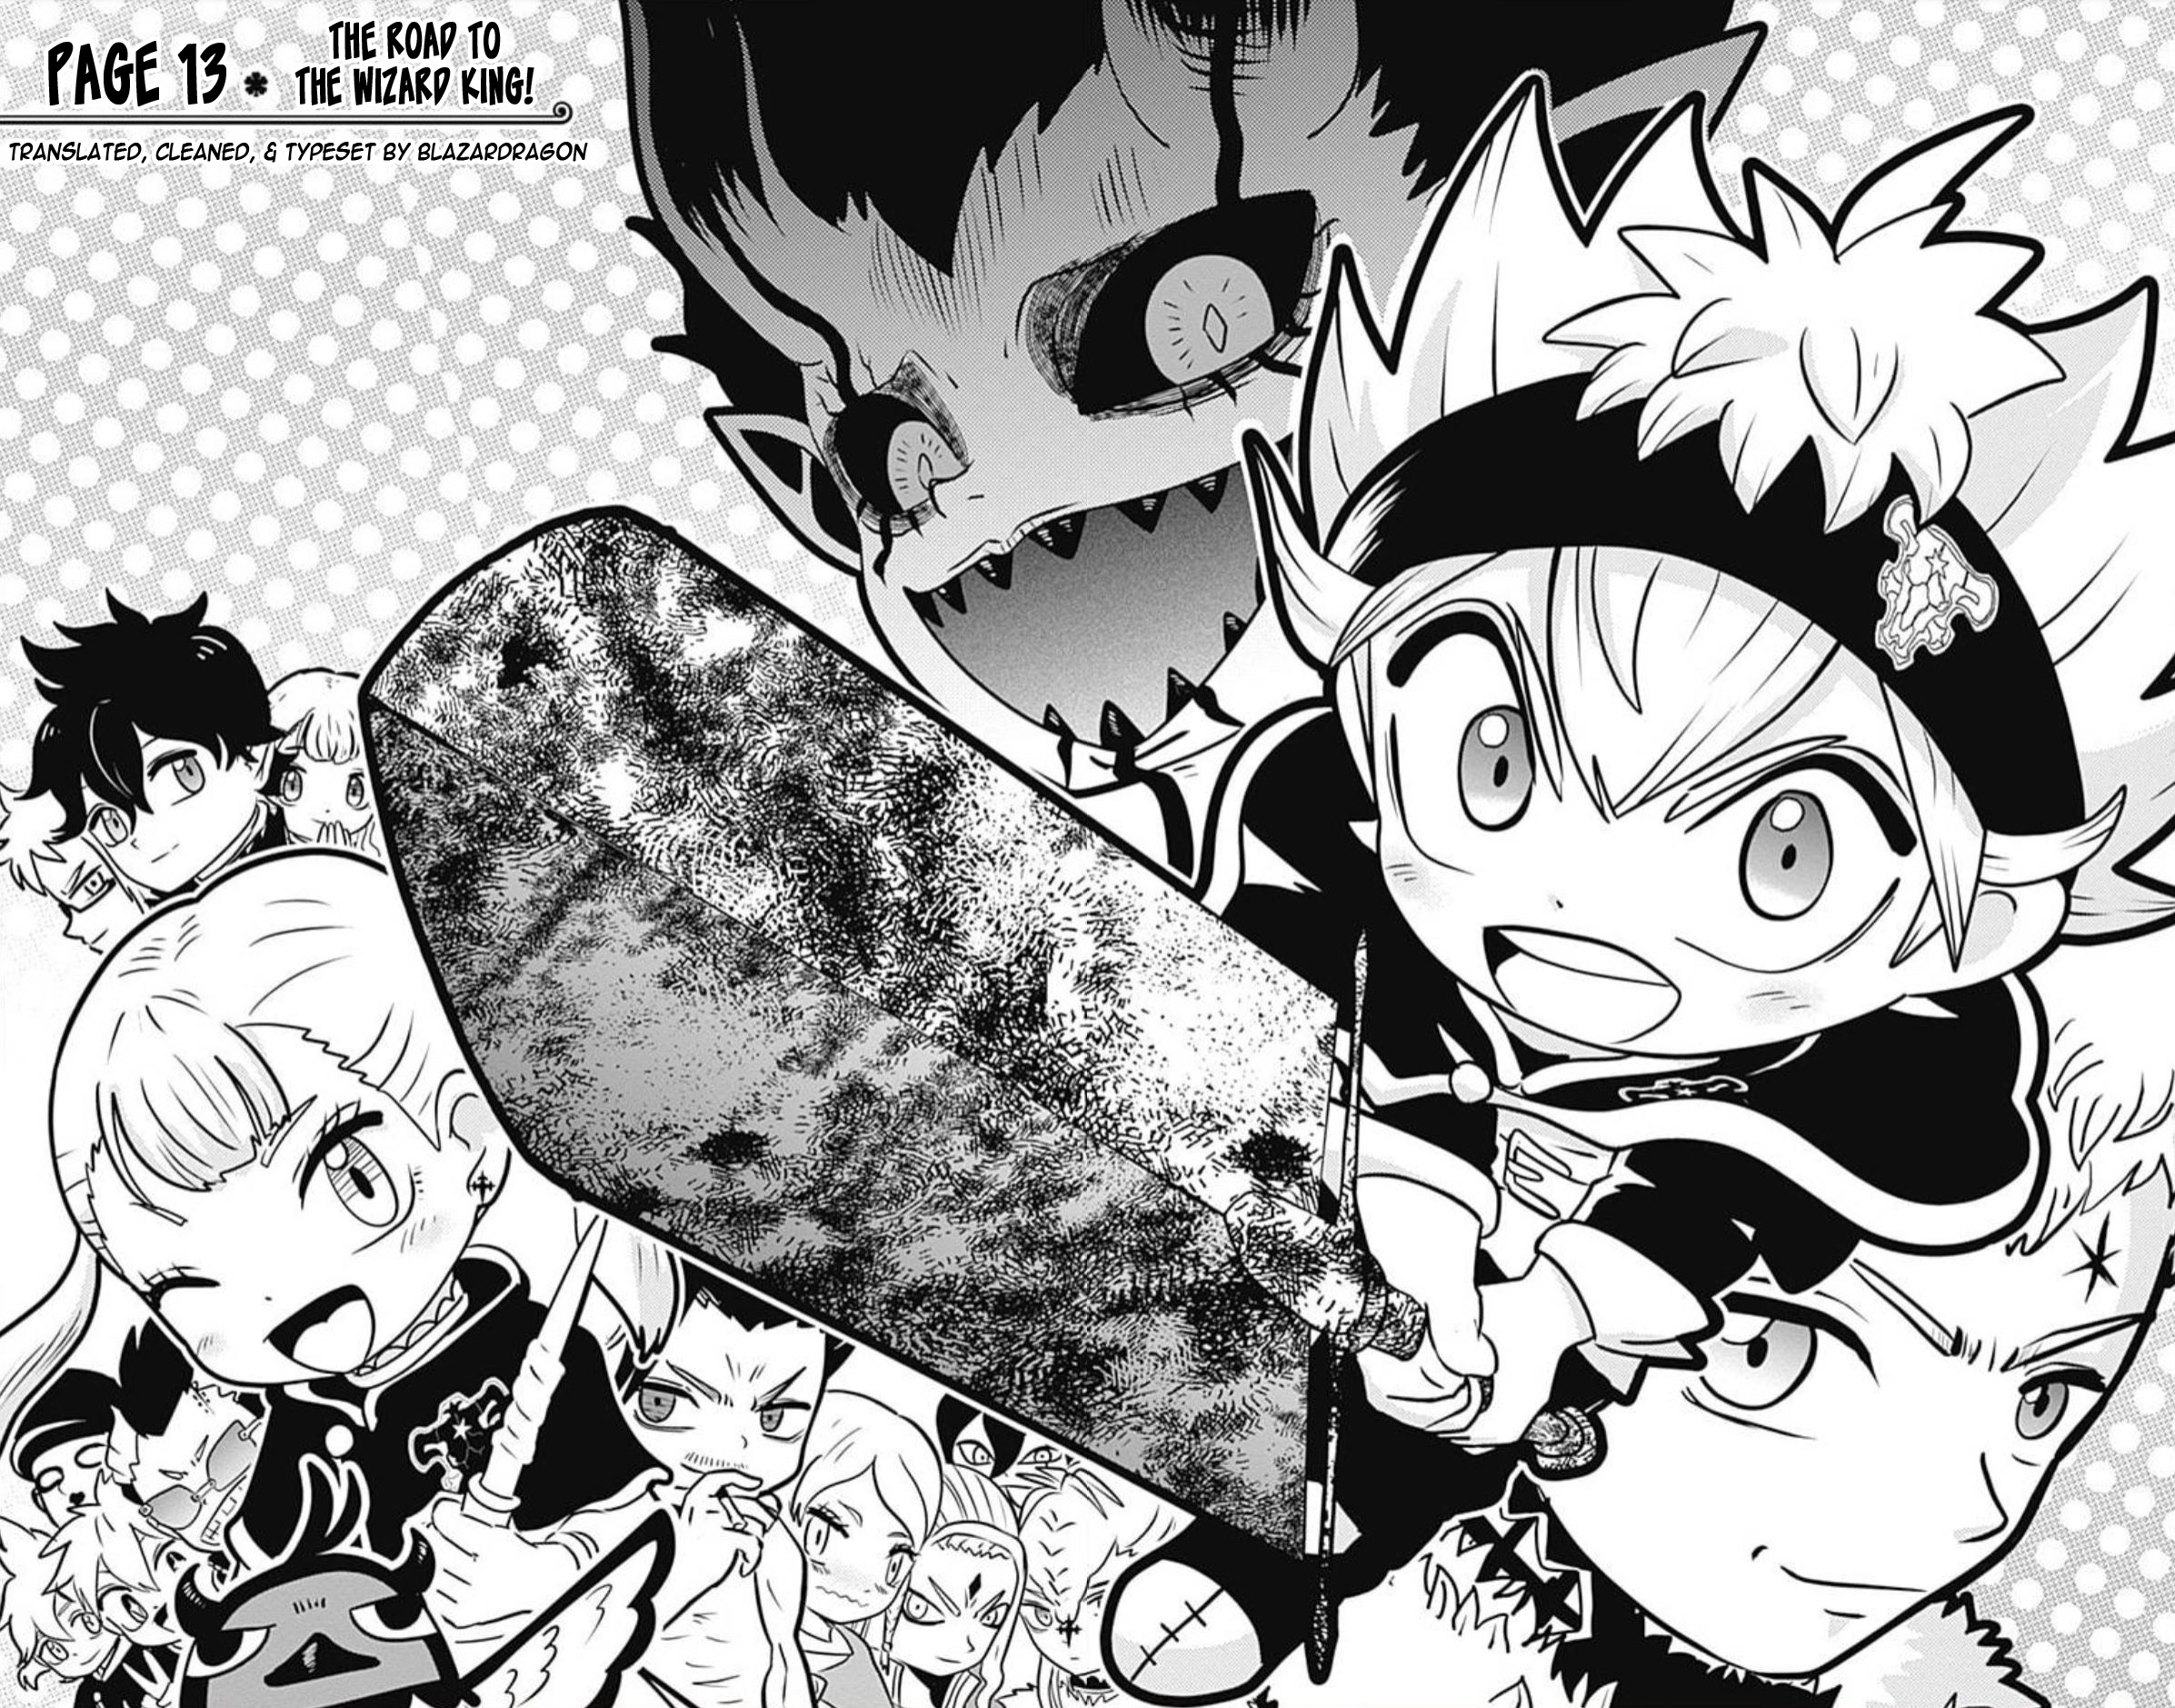 Black Clover Sd - Asta's Road To The Wizard King Vol.3 Chapter 13: The Road To The Wizard King! - Picture 2